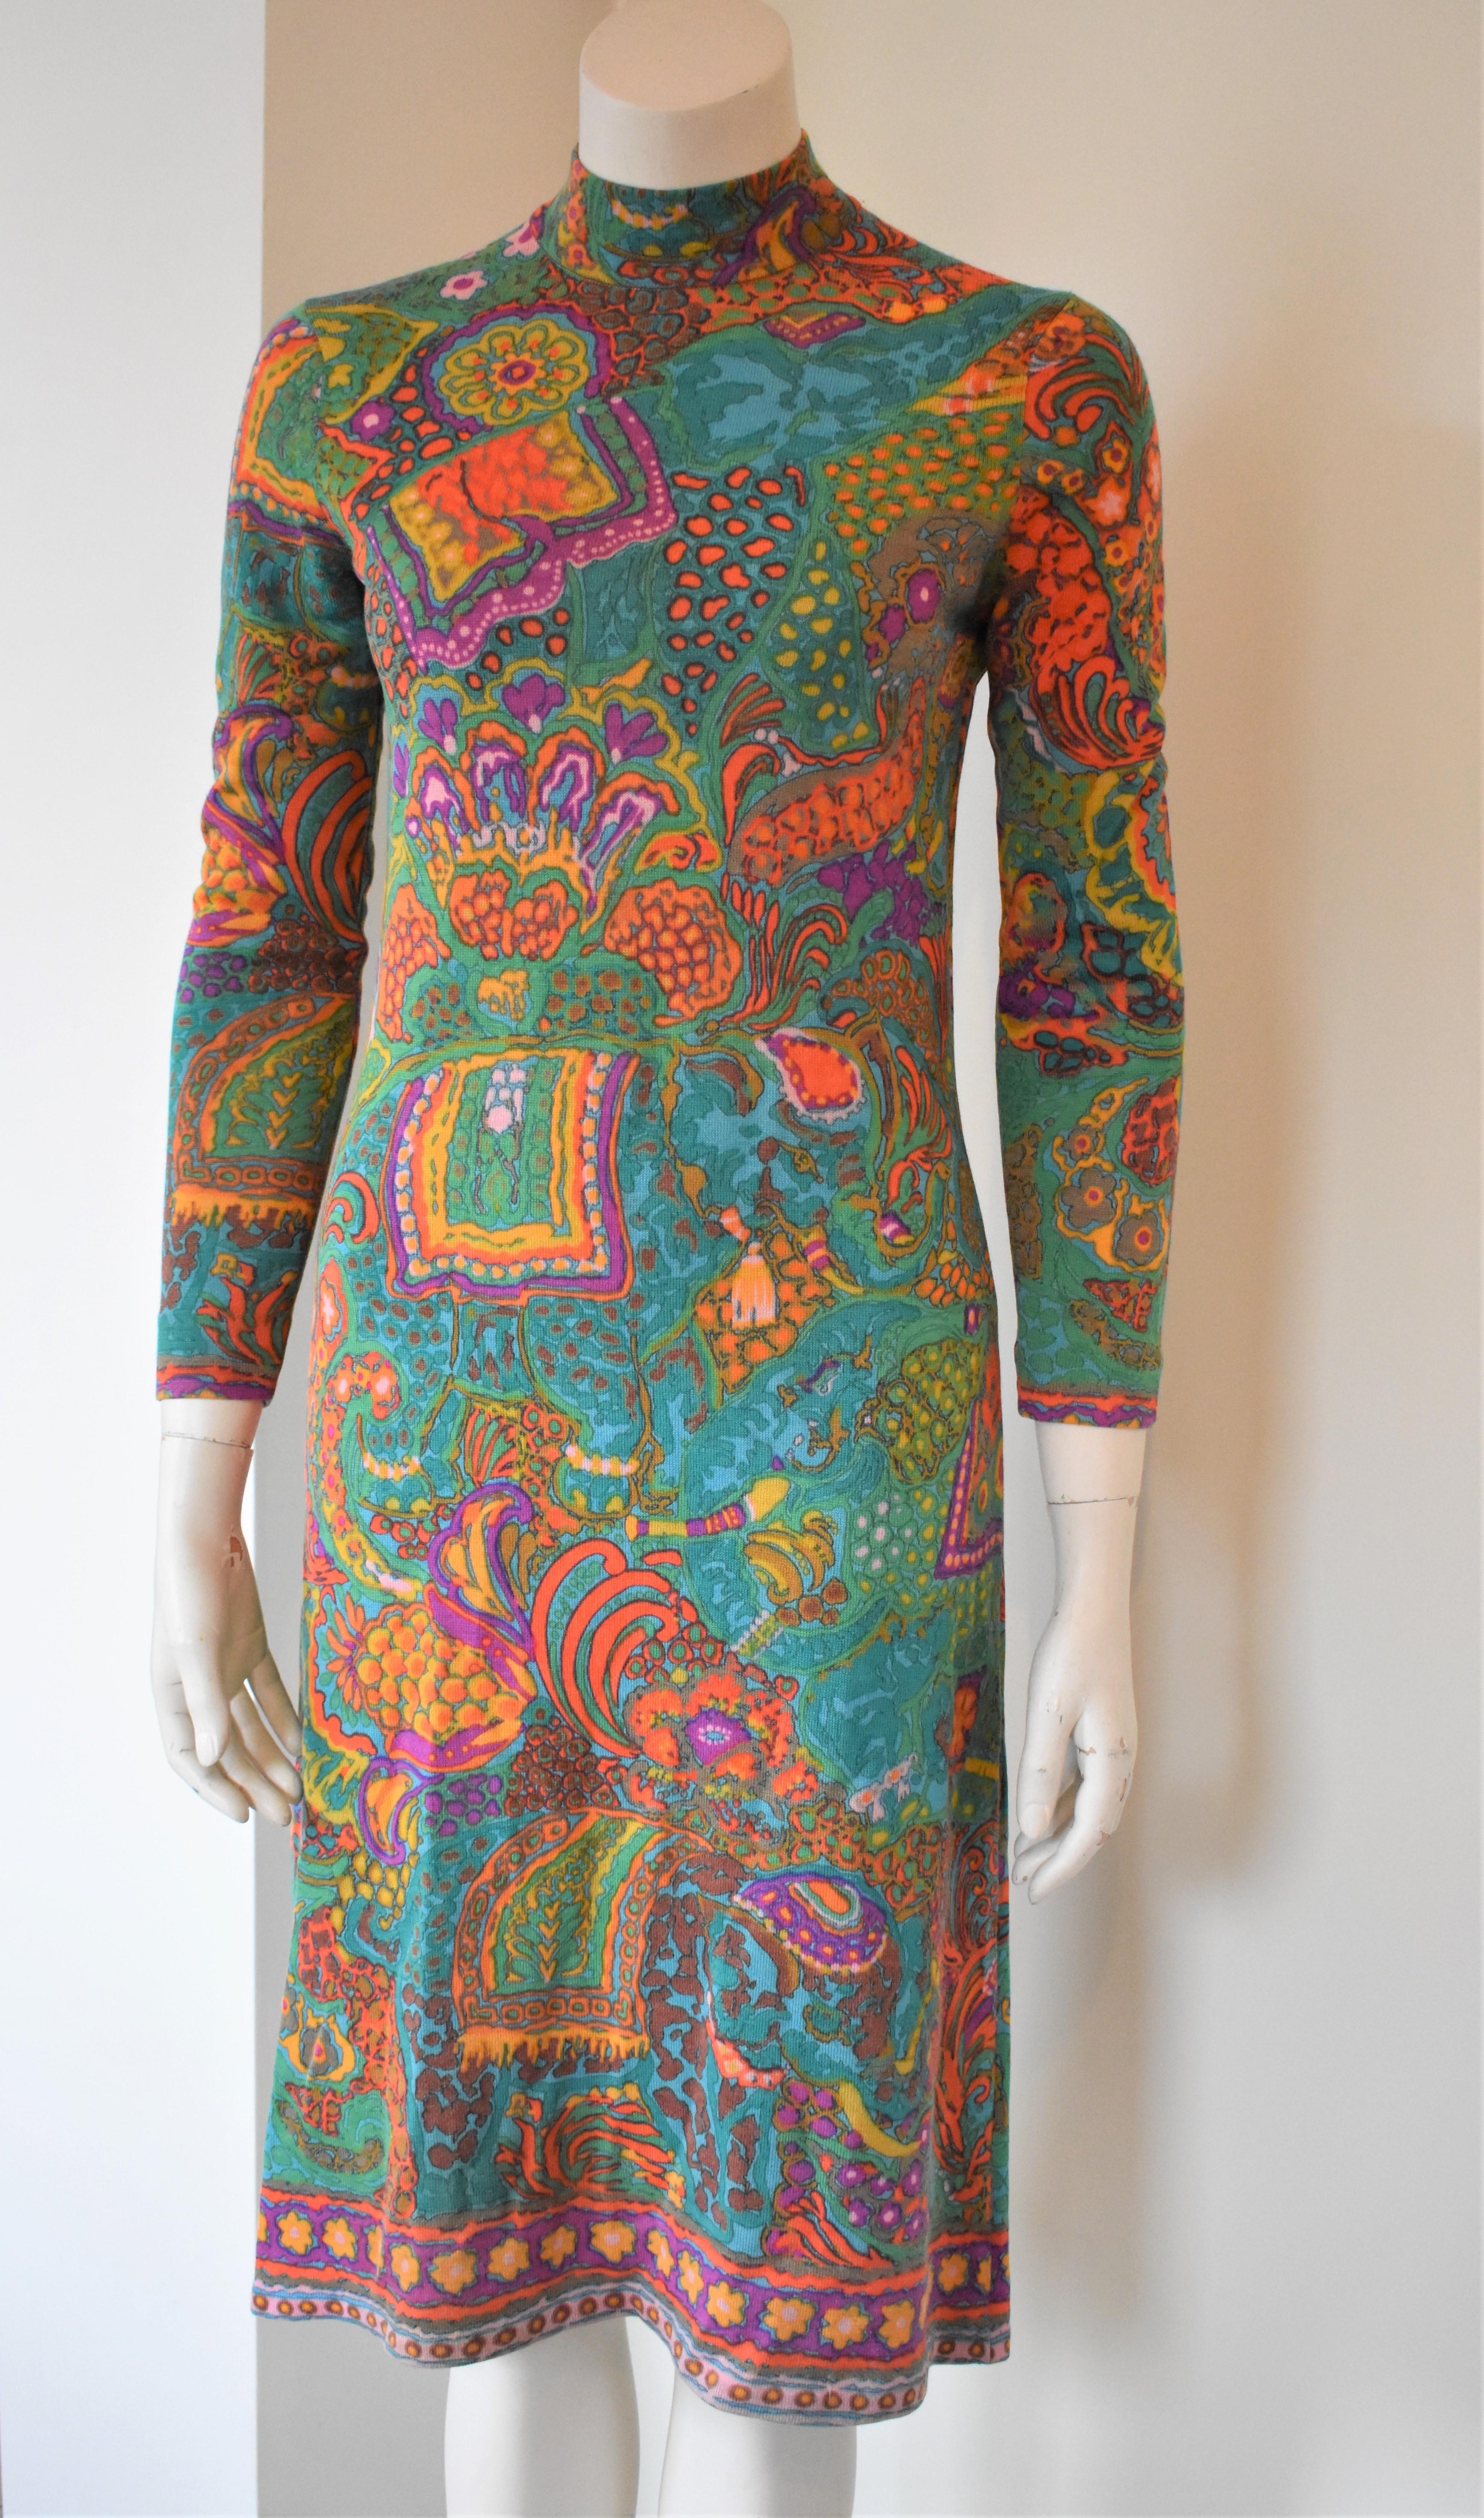 A beautiful vintage dress made by Leonard Paris in a colorful print